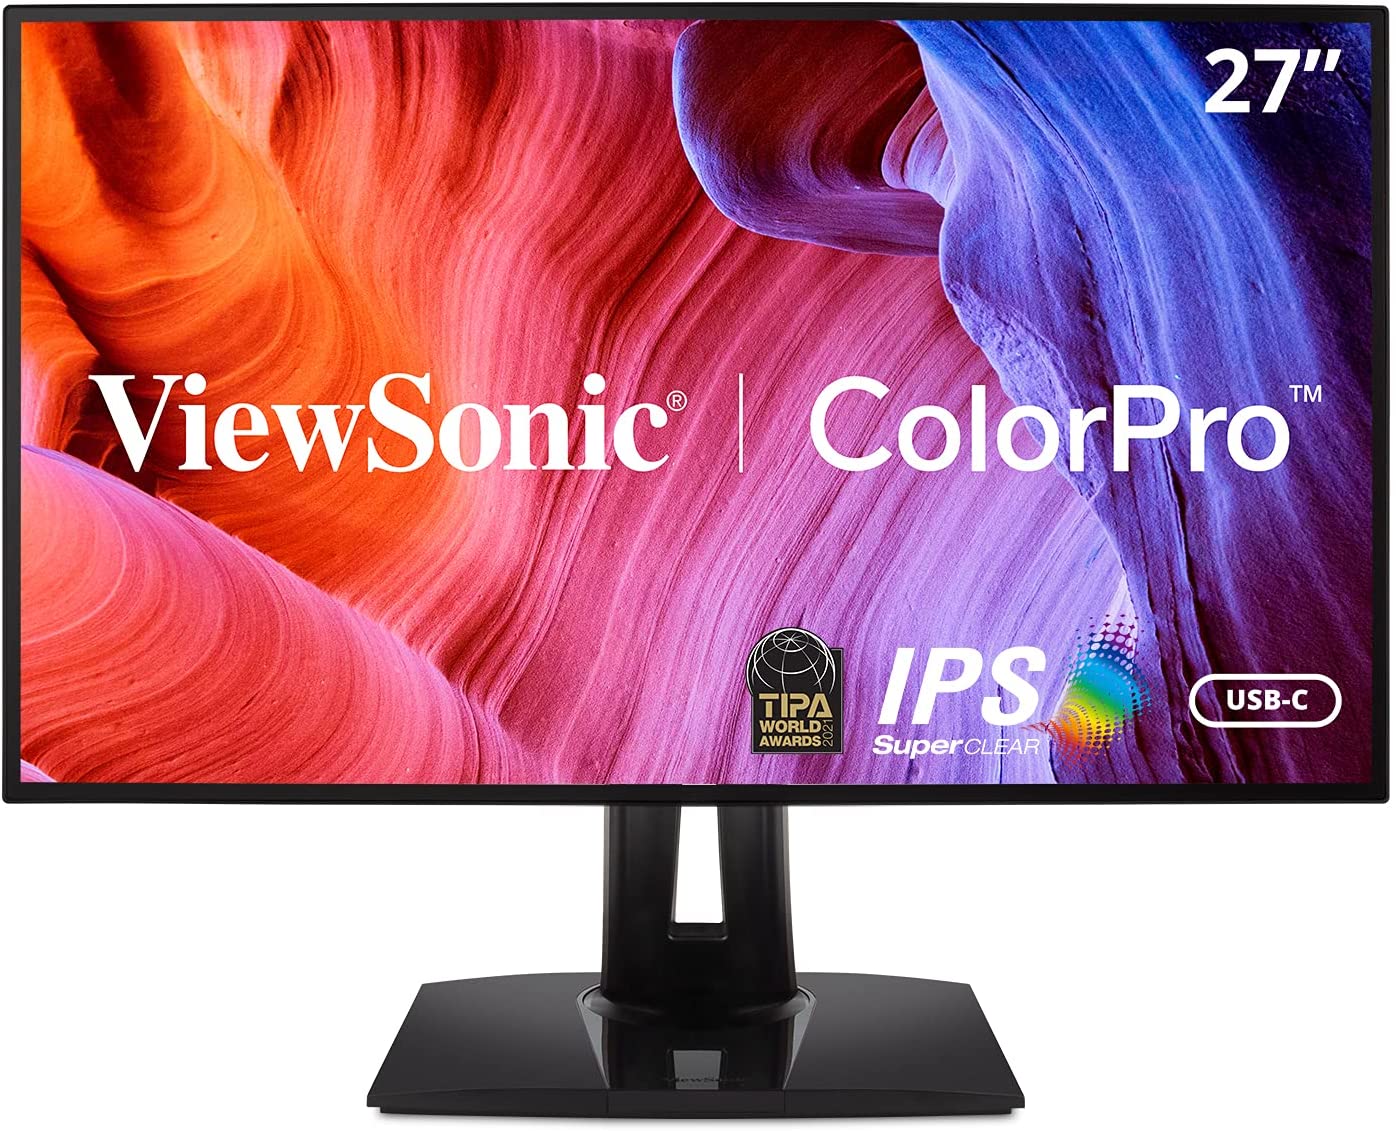 The ViewSonic VP2768a ColorPro monitor.